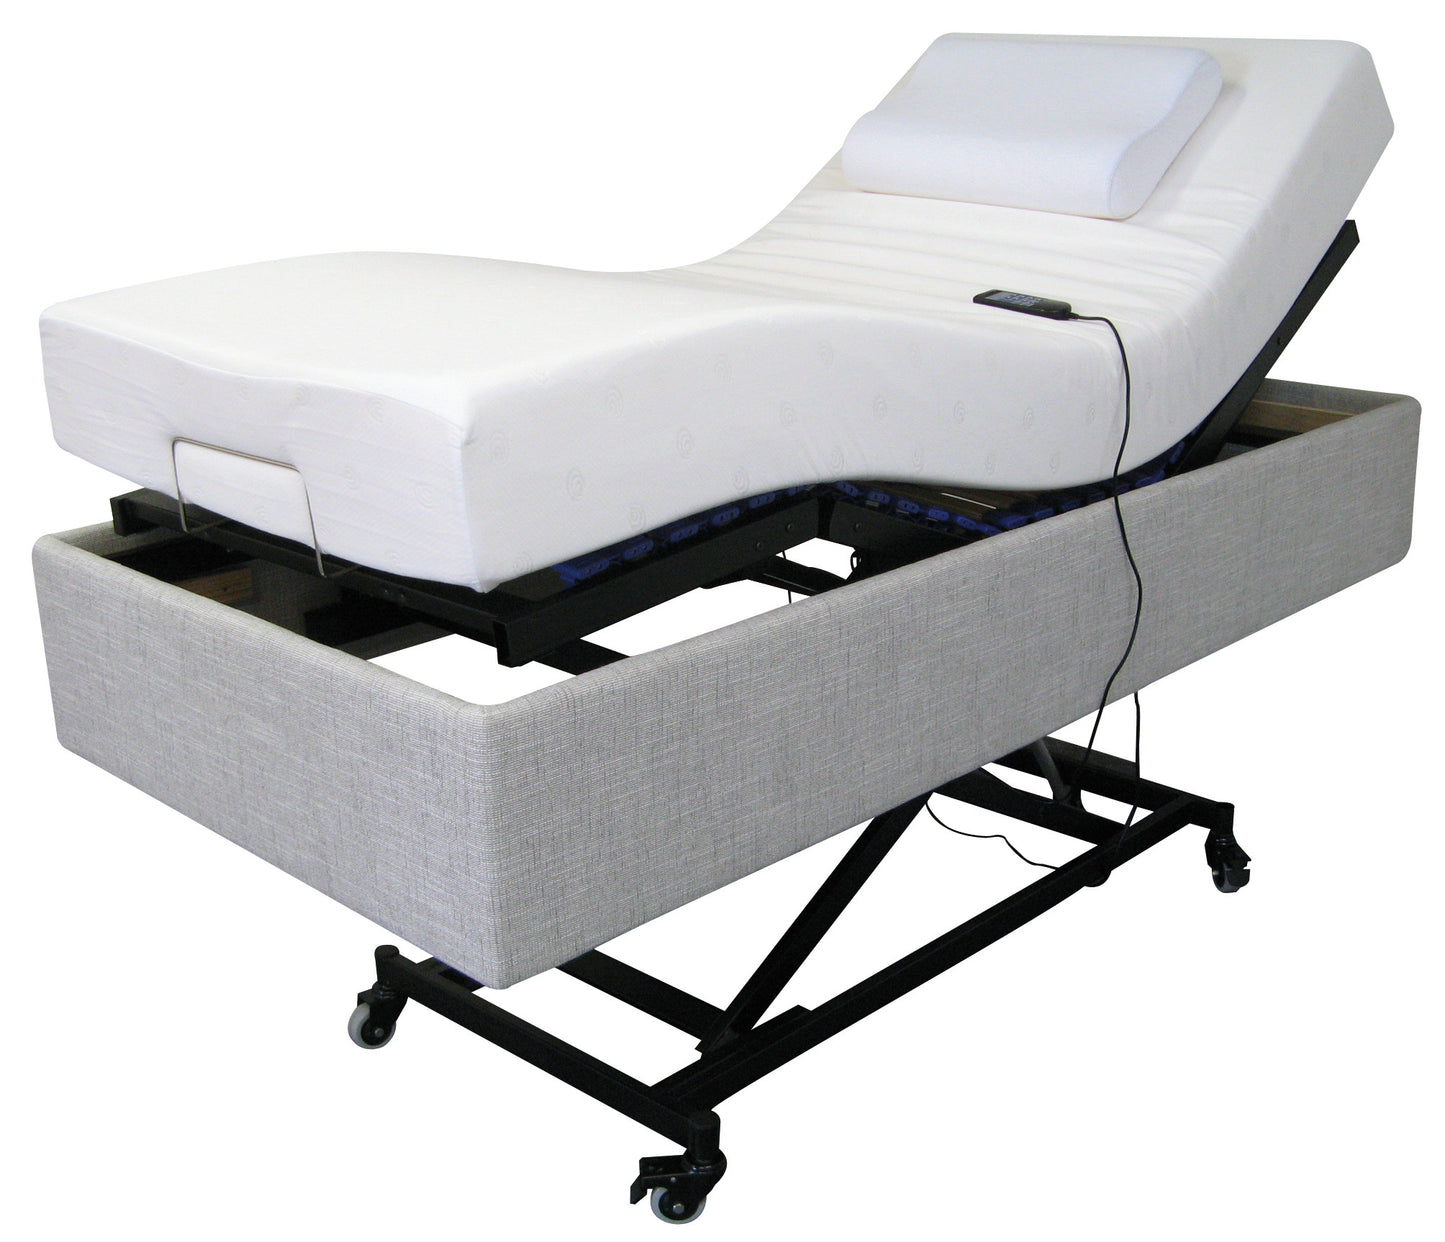 IC333 Hospital Style Homecare Bed